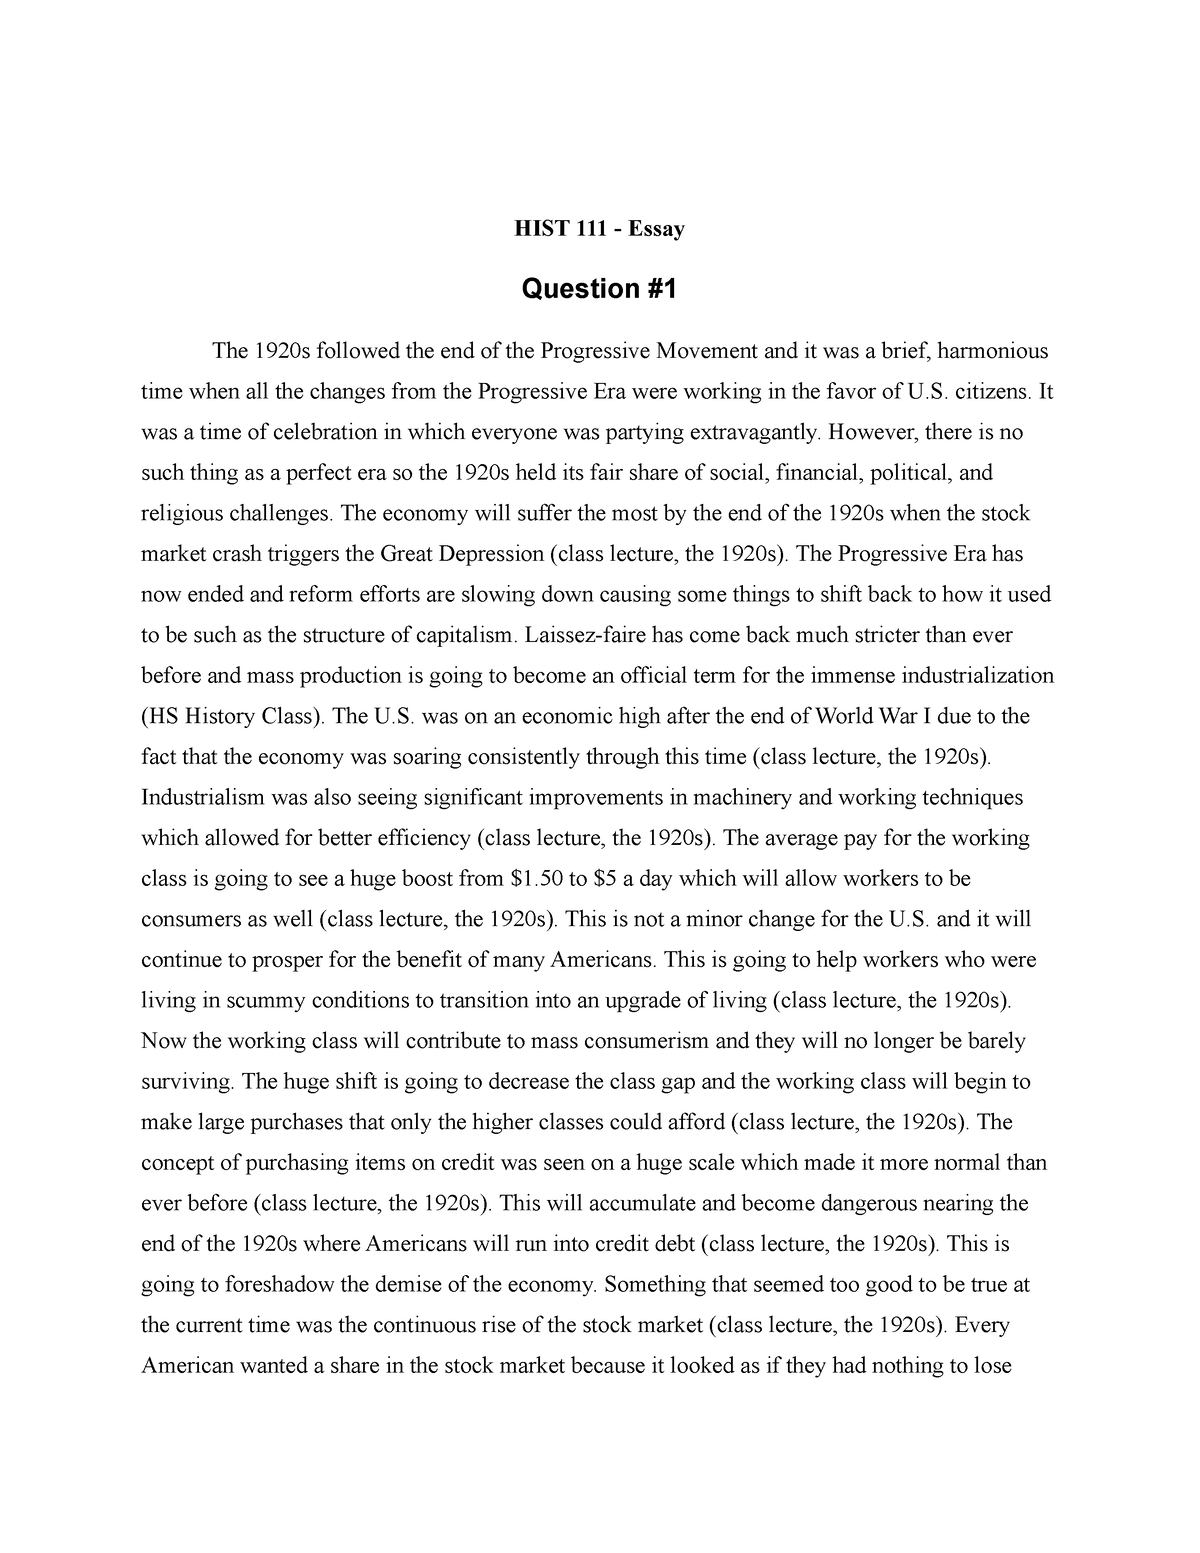 1920s essay introduction